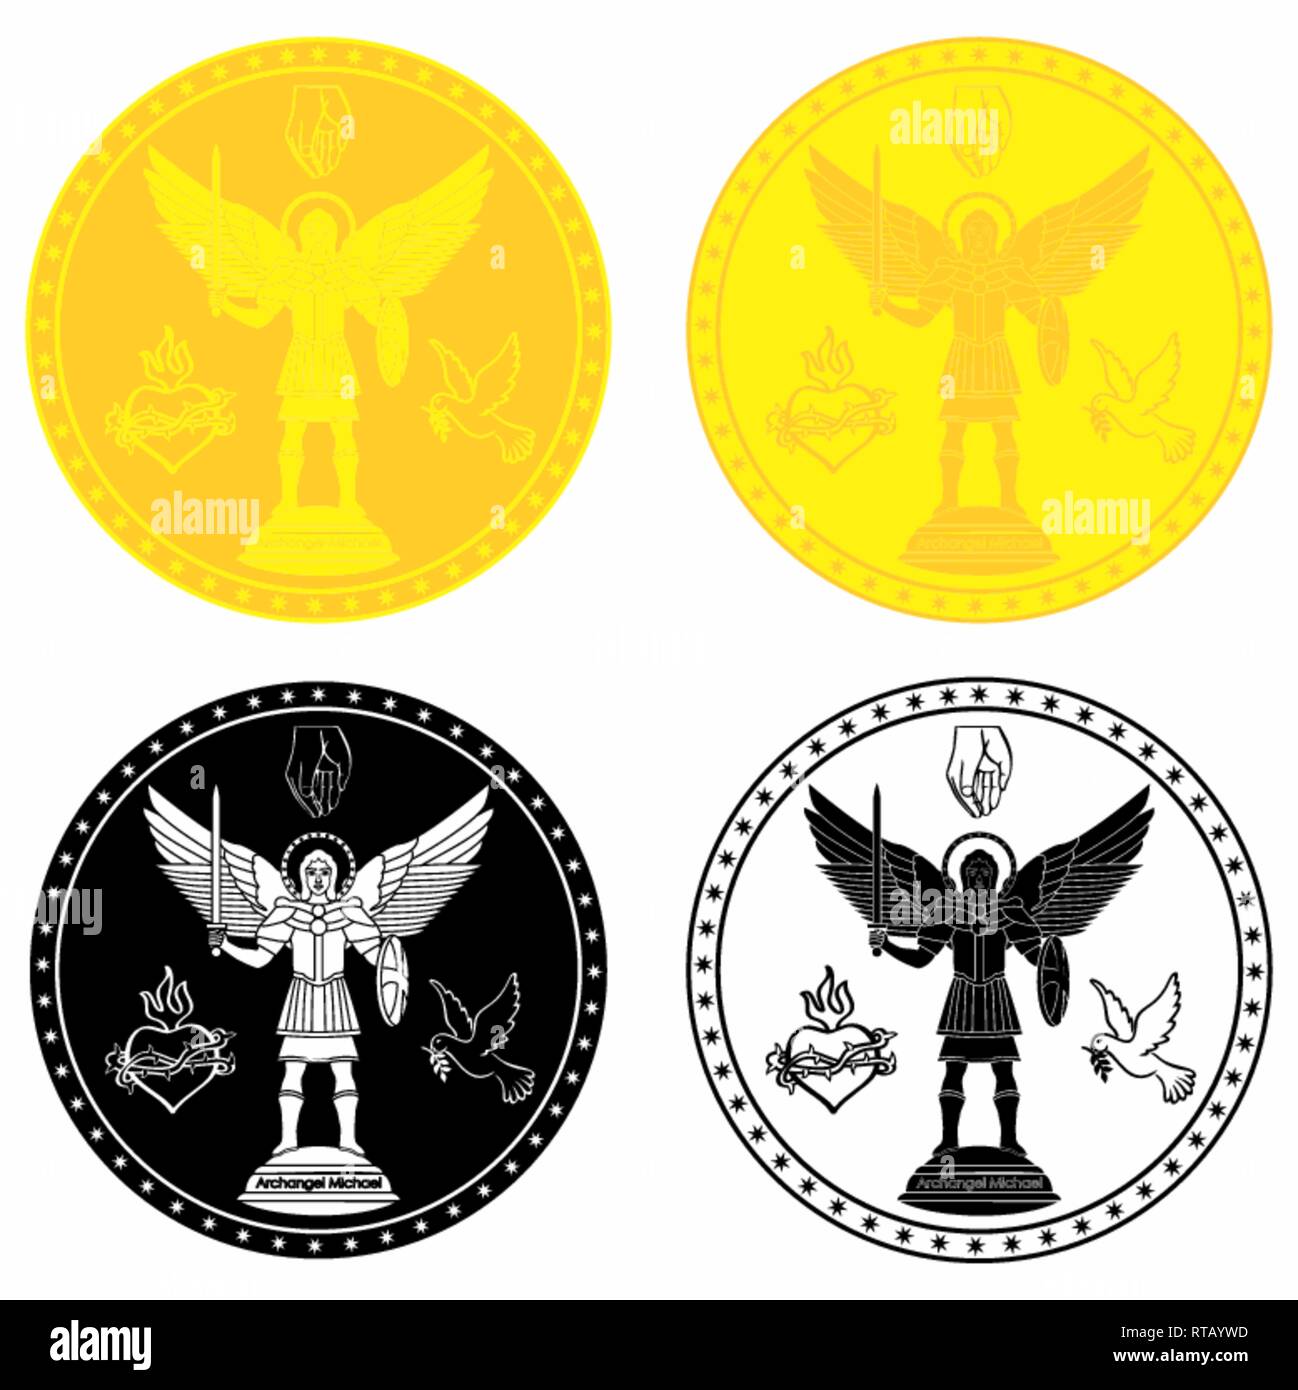 Archangel Michael medal gold and black fill. Stock Vector